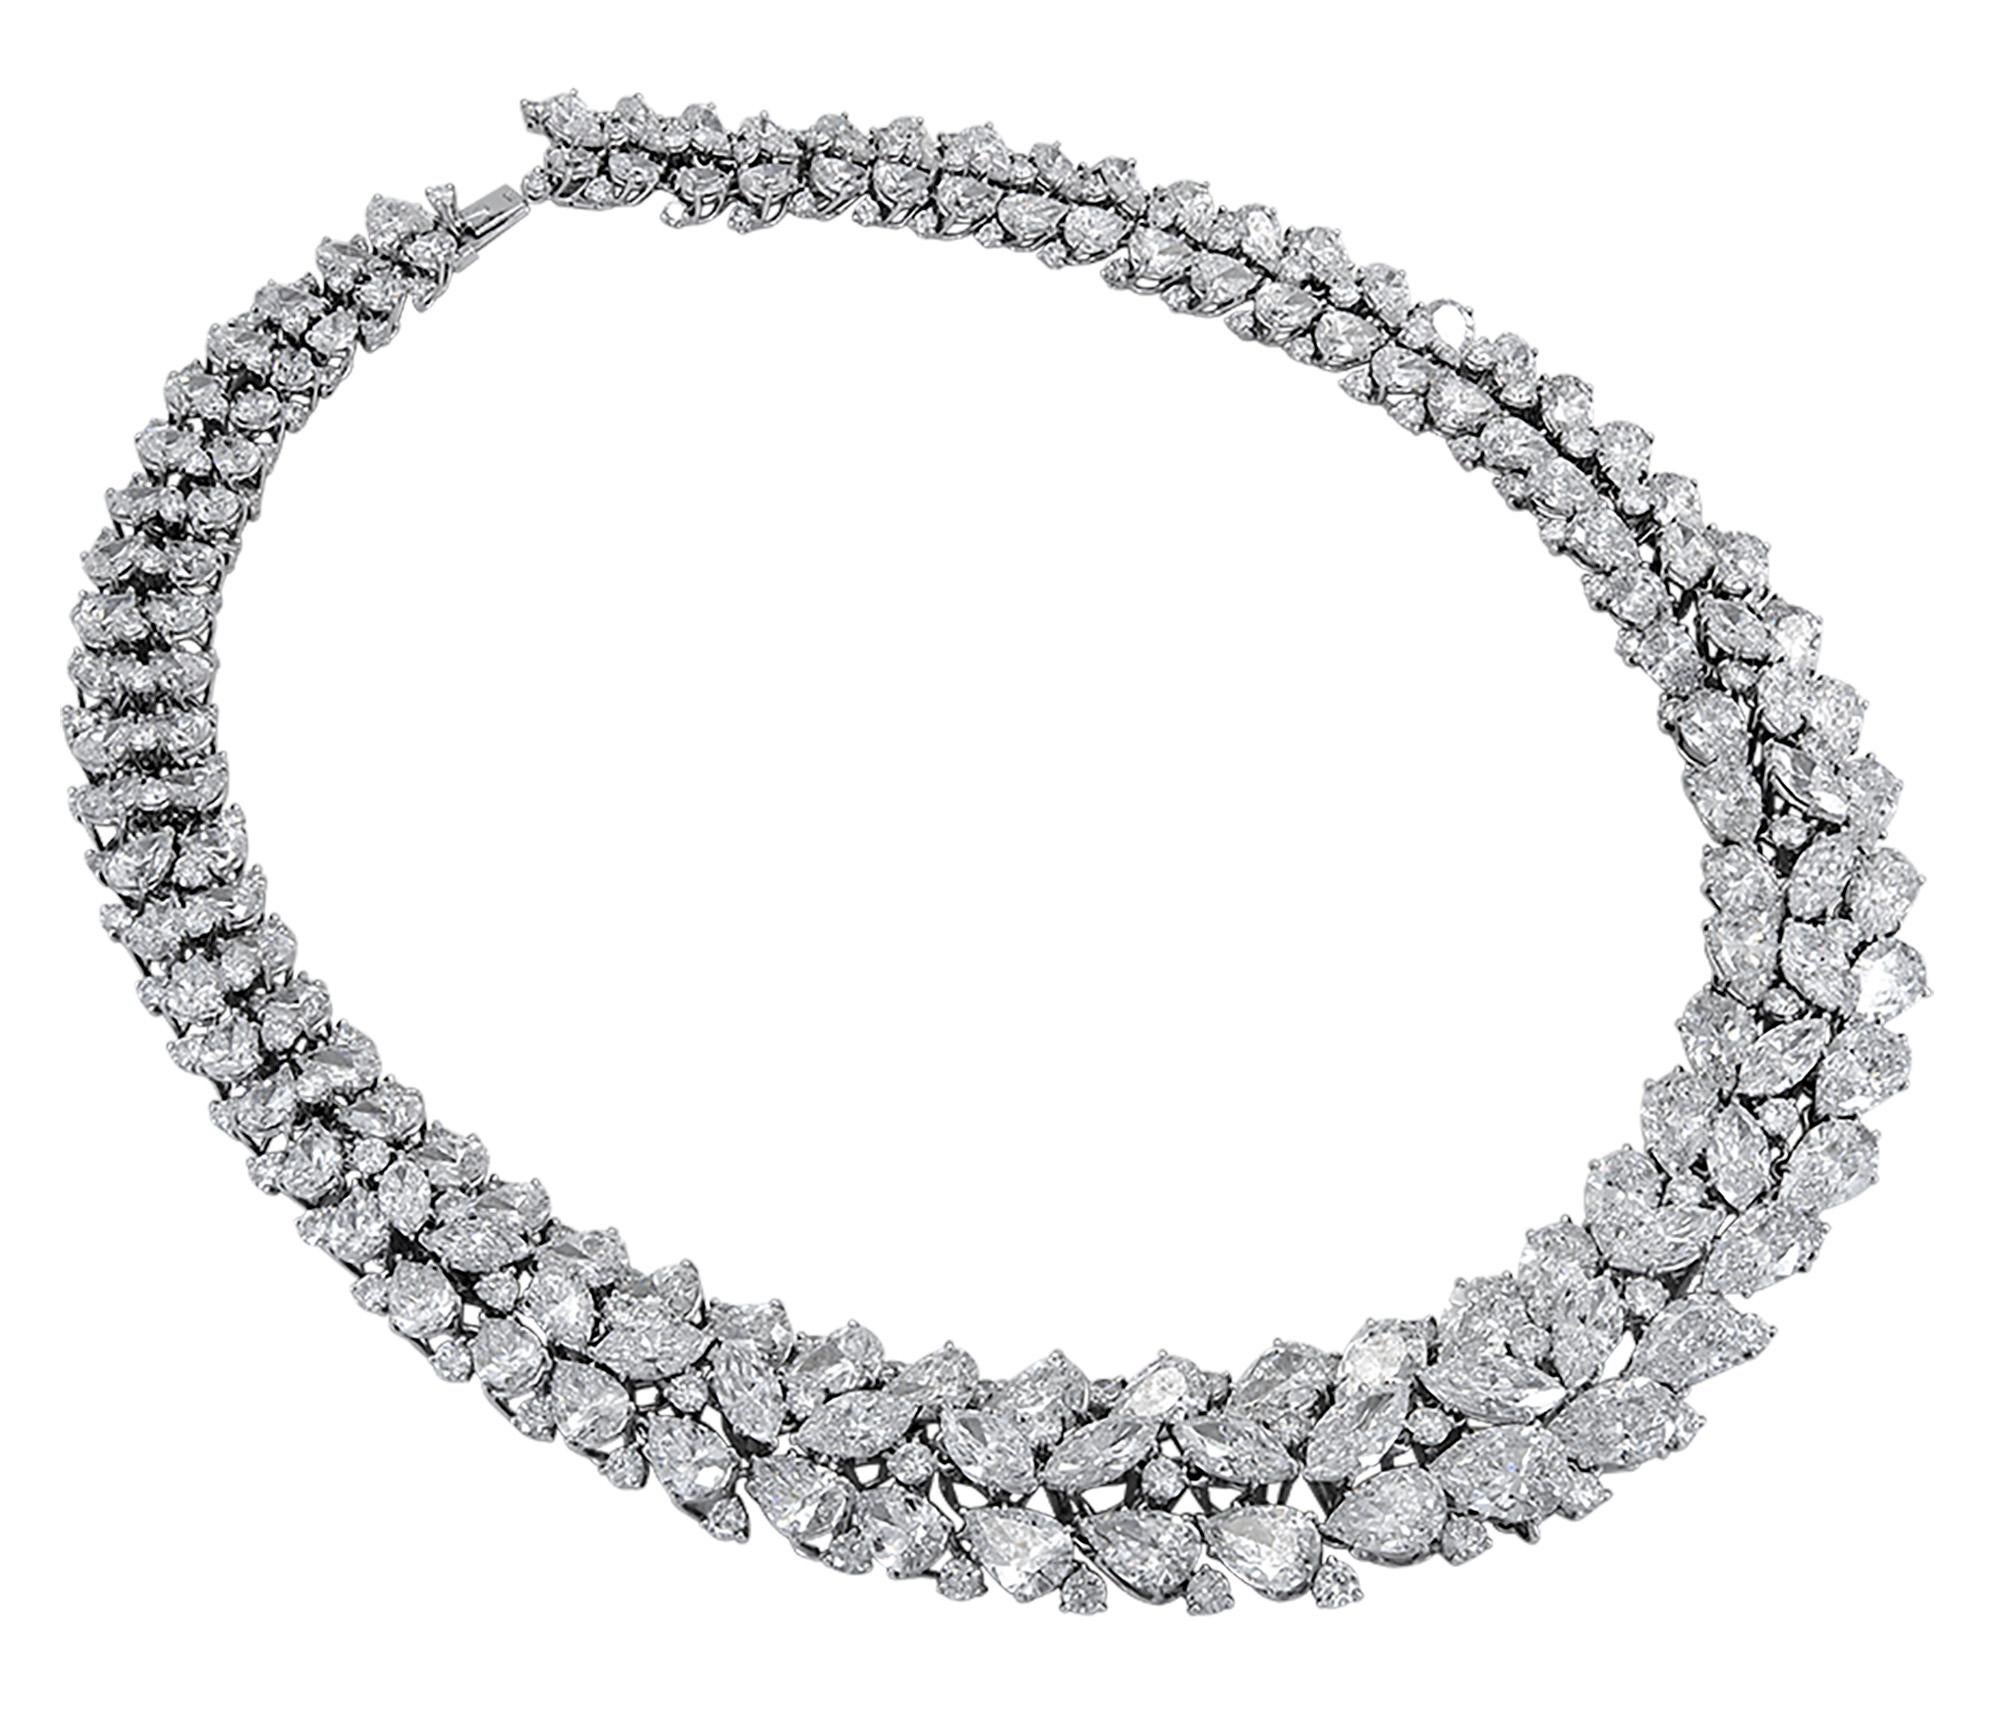 An important necklace created by Graff.
Made in platinum and set with pear shape, marquise, and round diamonds all over the necklace weighing 100.13 carats total. 
19 diamonds are certified by GIA and one diamond by HRD. The diamonds are from 2.03